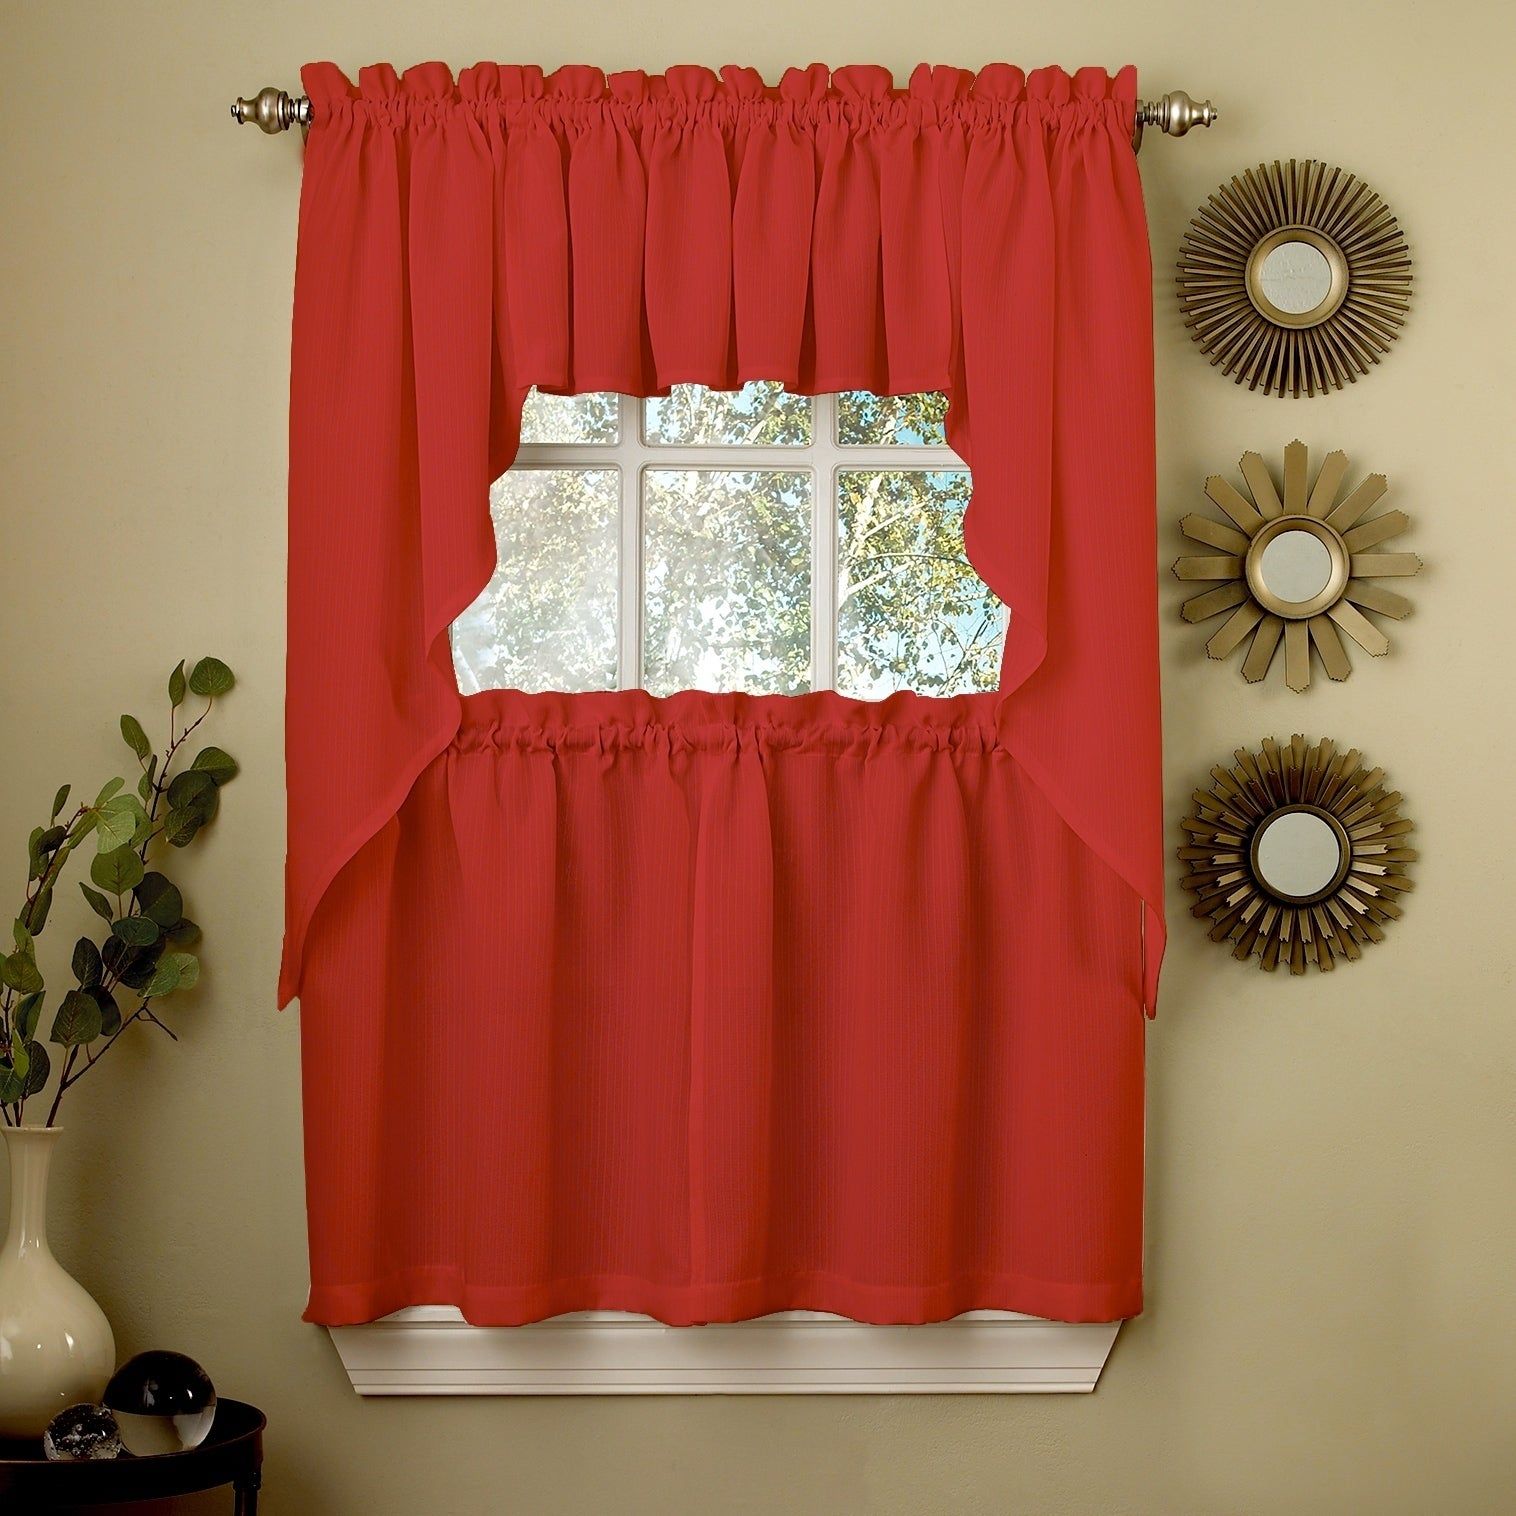 Opaque Red Ribcord Kitchen Curtain Pieces – Tiers/ Valances/ Swags Inside Lodge Plaid 3 Piece Kitchen Curtain Tier And Valance Sets (View 18 of 20)